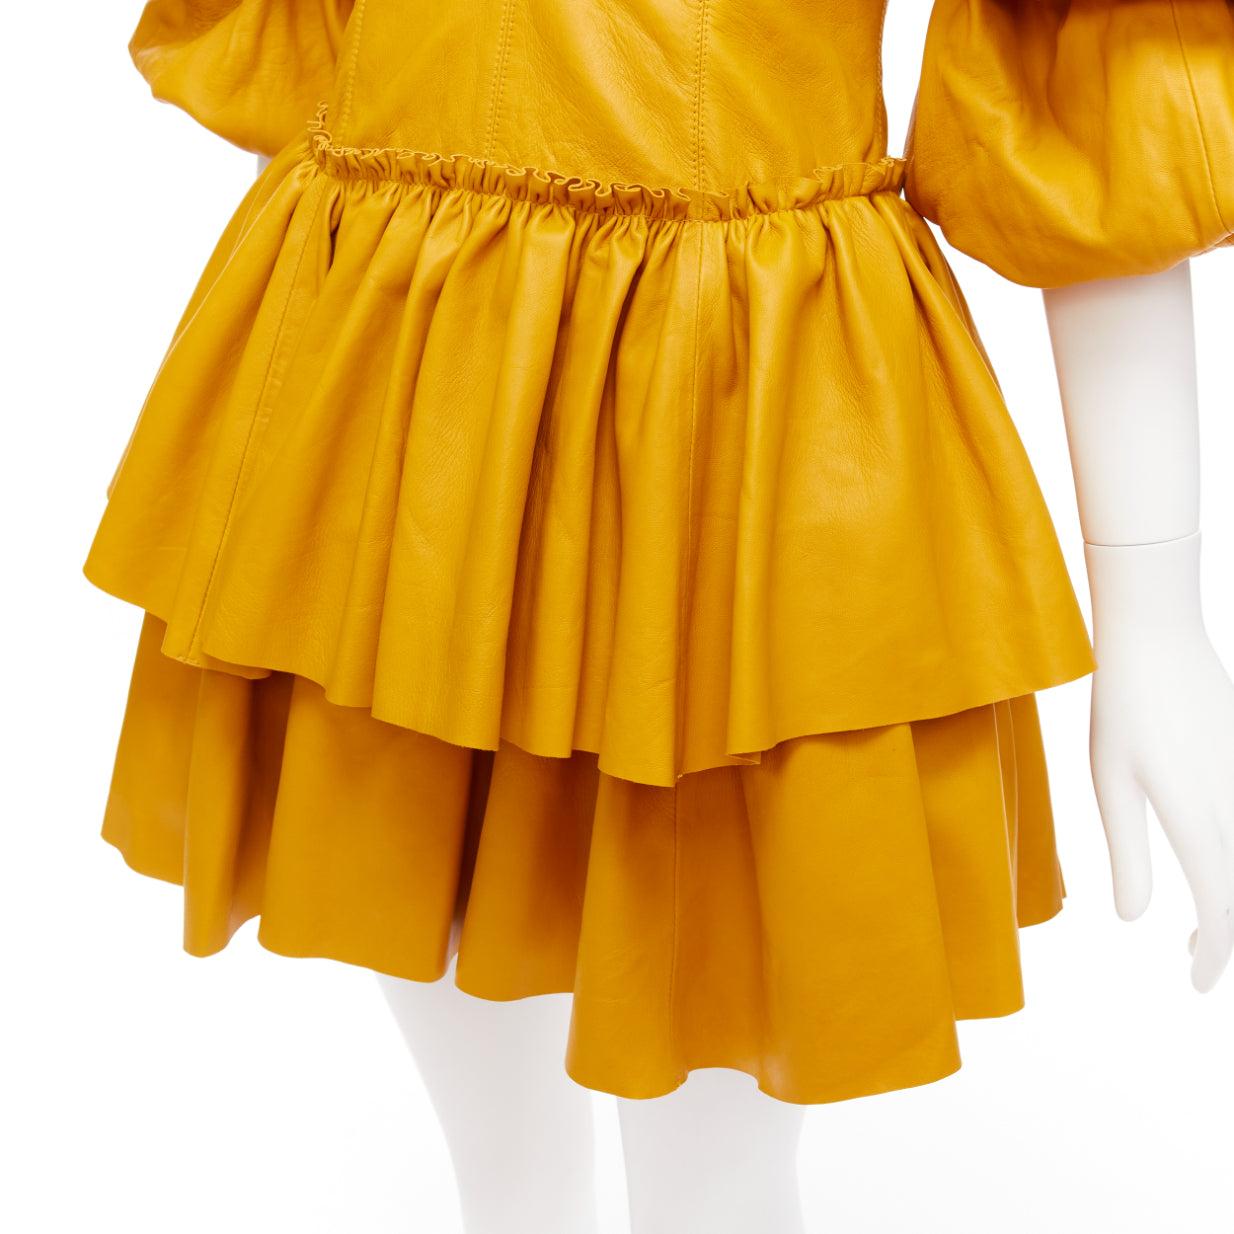 AJE 2019 Castellain mustard yellow leather puff sleeve tiered mini dress UK6 XS
Reference: AAWC/A00563
Brand: Aje
Model: Castellain
Collection: 2019
As seen on: Alessandra Ambrosio
Material: Leather
Color: Yellow
Pattern: Solid
Closure: Zip
Lining: